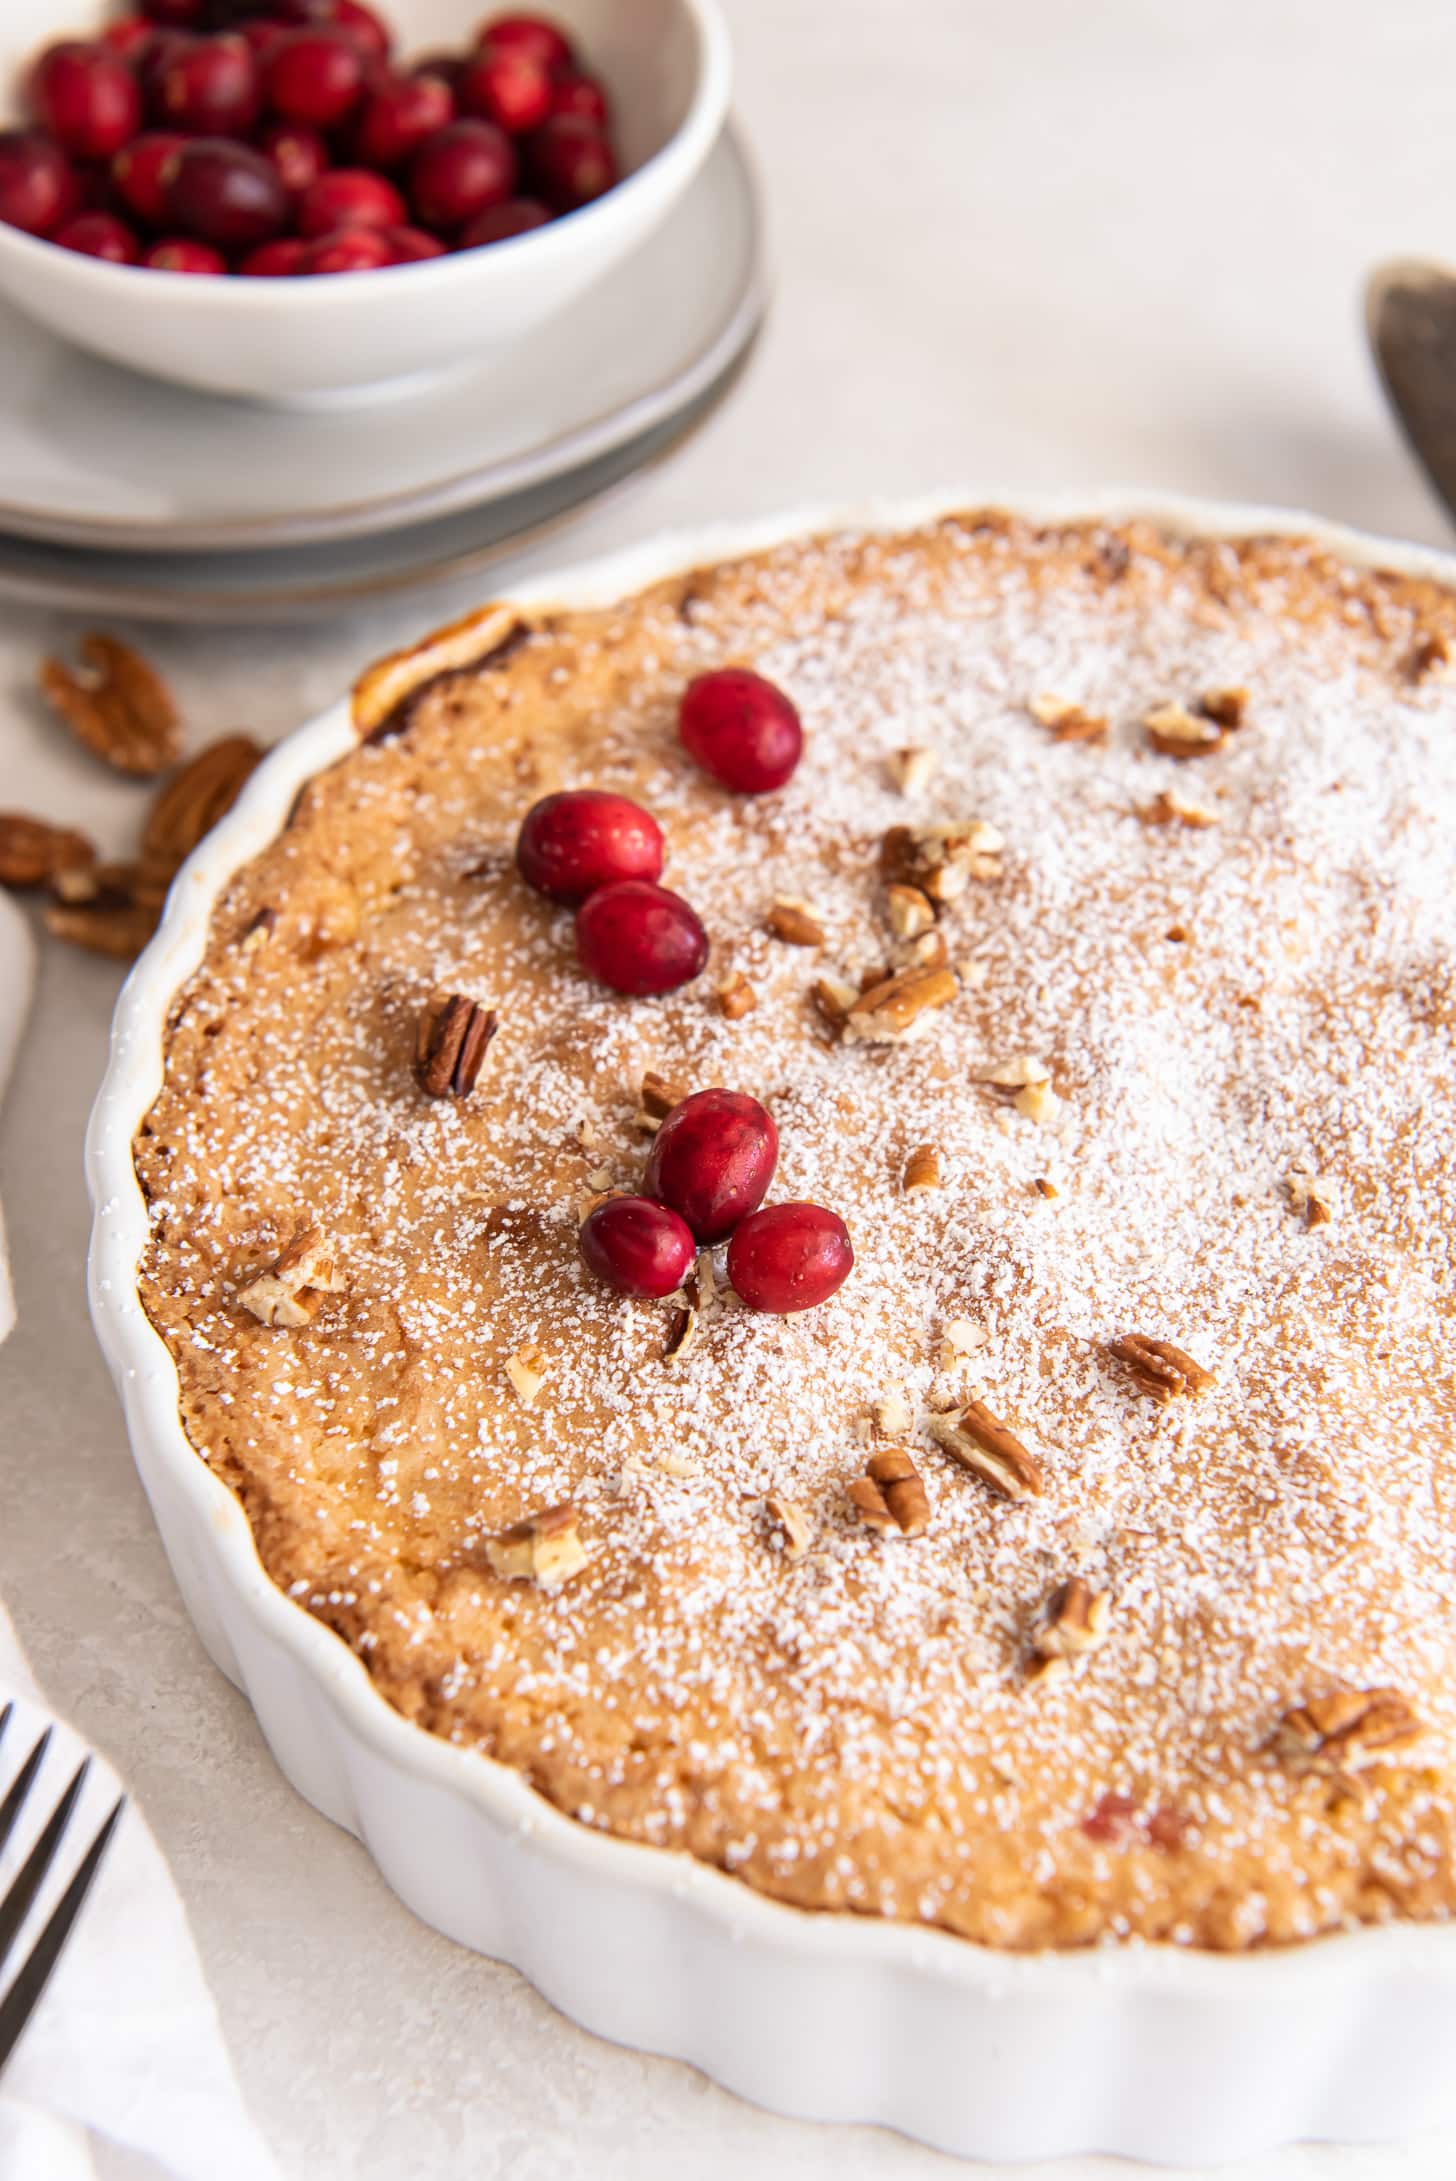 nantucket pie with dusting of confectioners' sugar and a couple fresh cranberries on top.